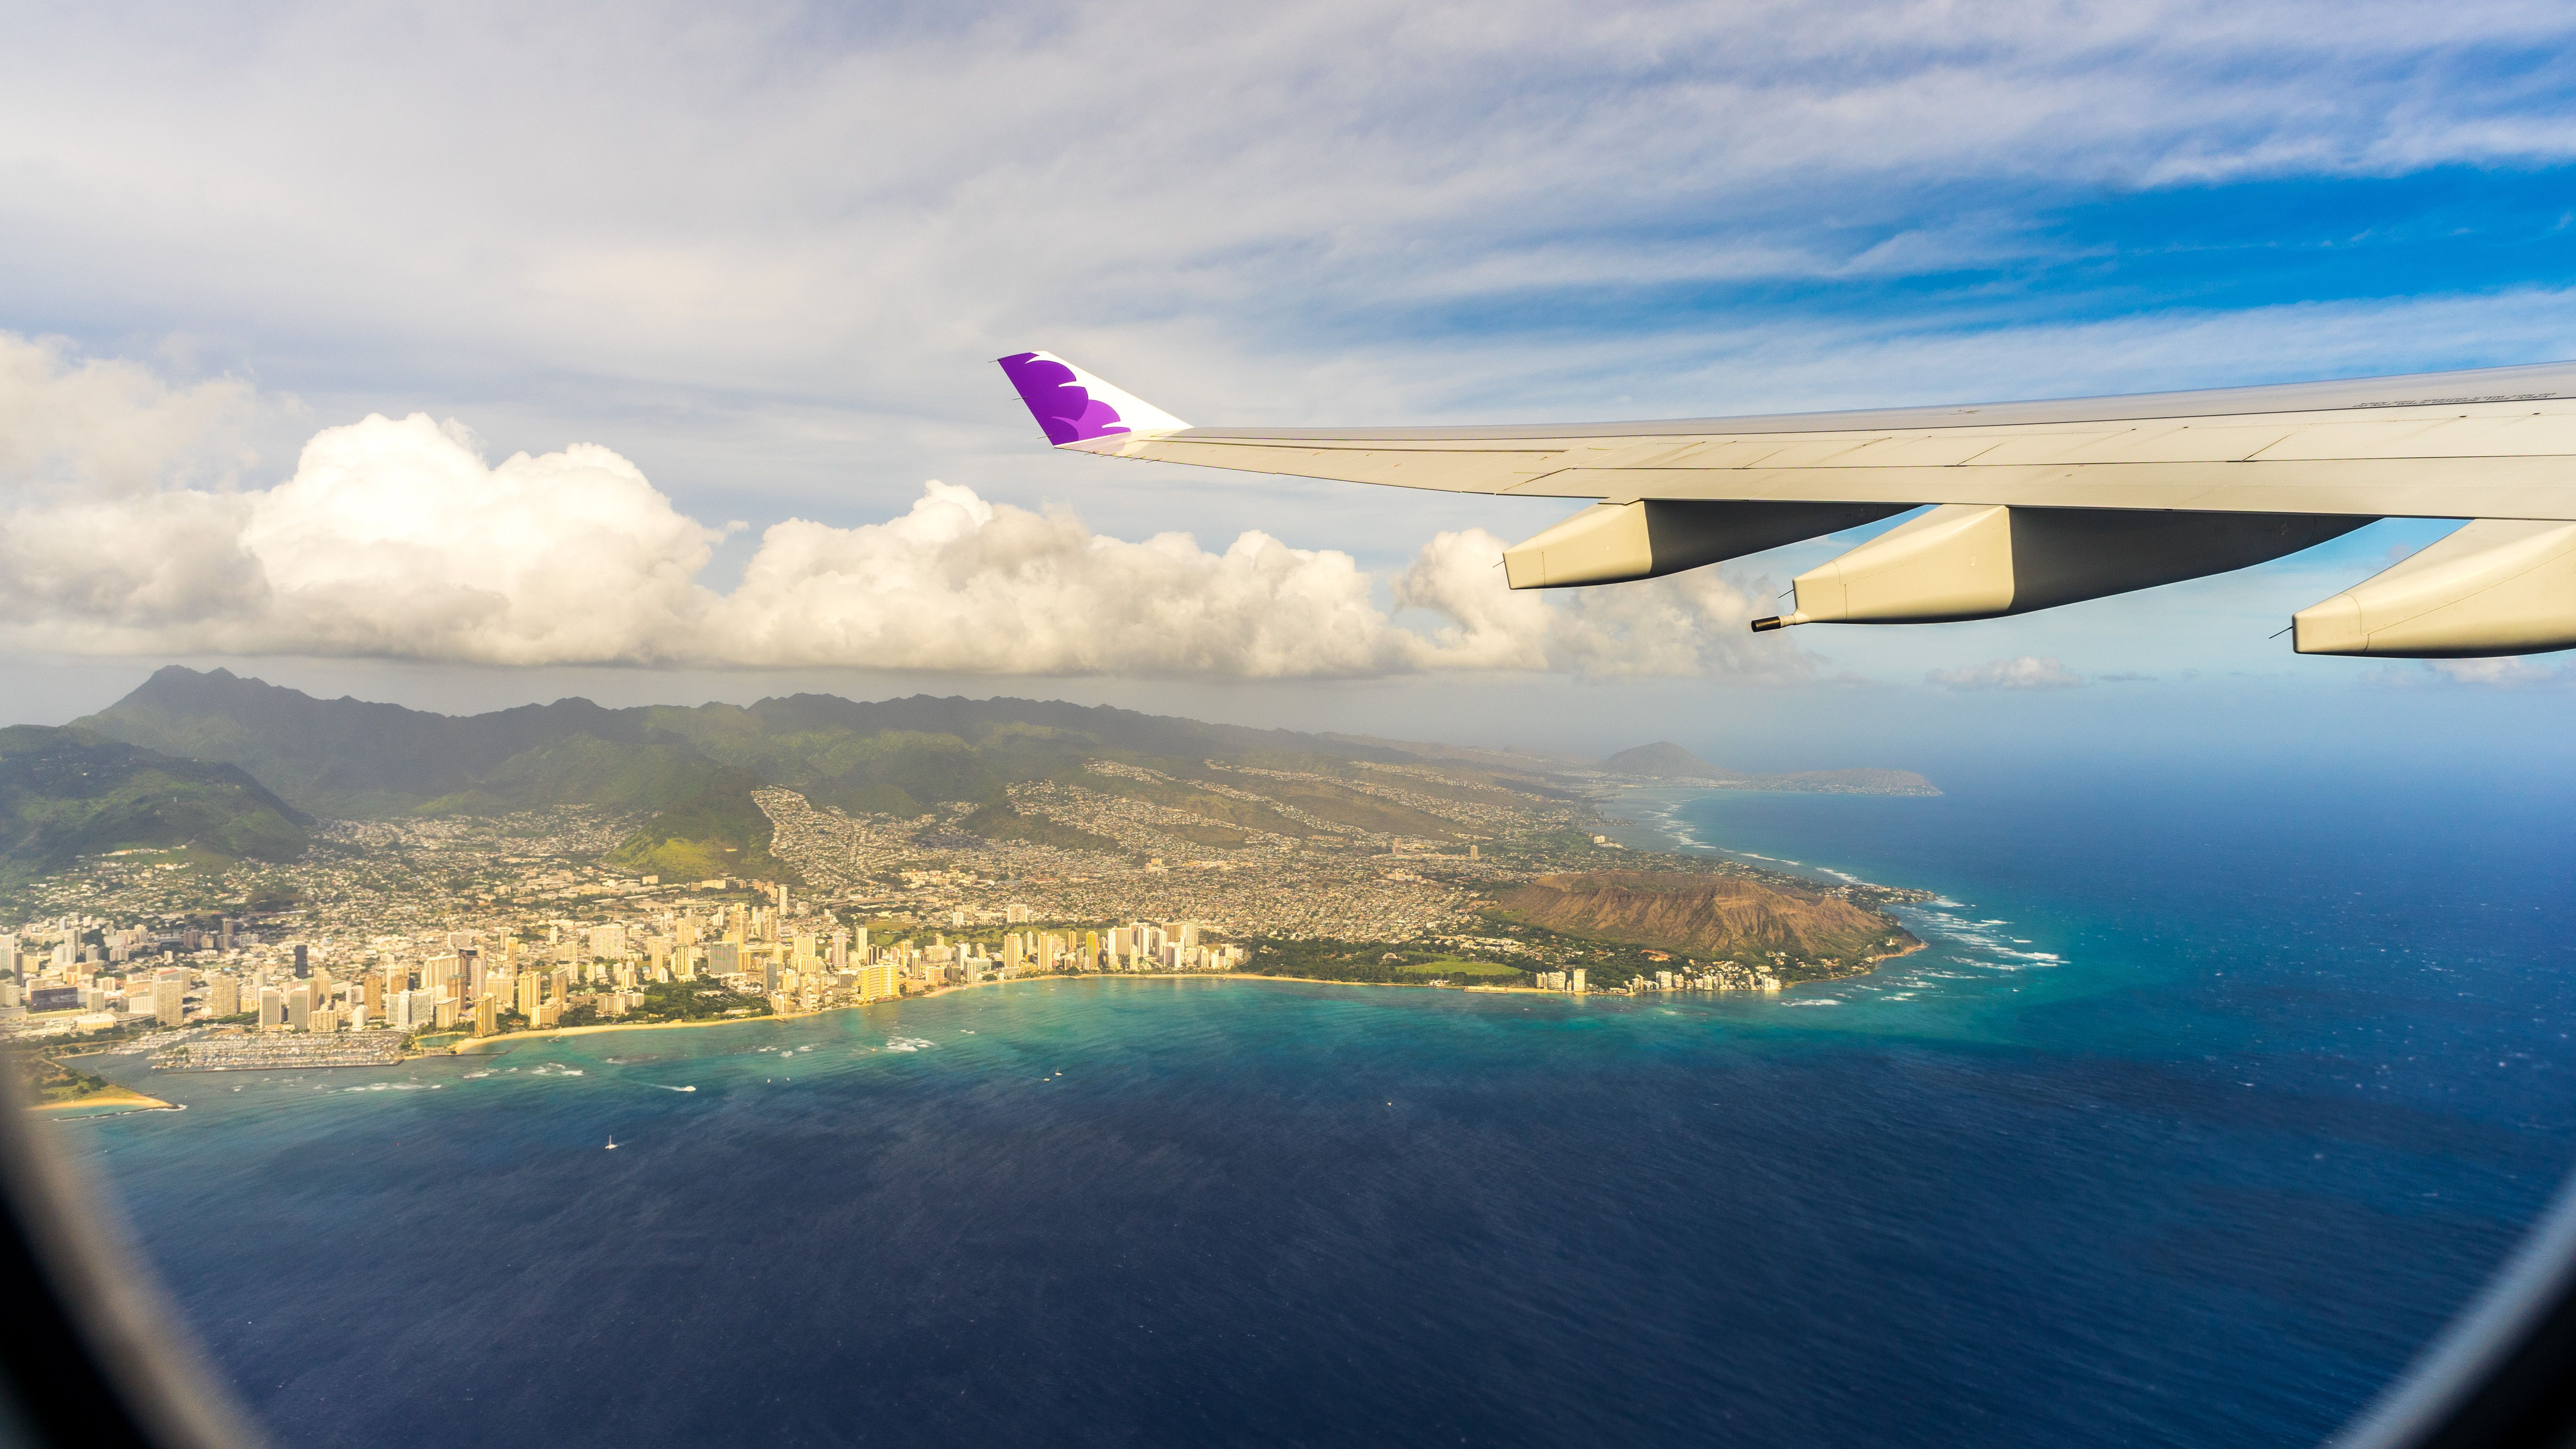 View from an aircraft flying low near the Hawaiian coast.